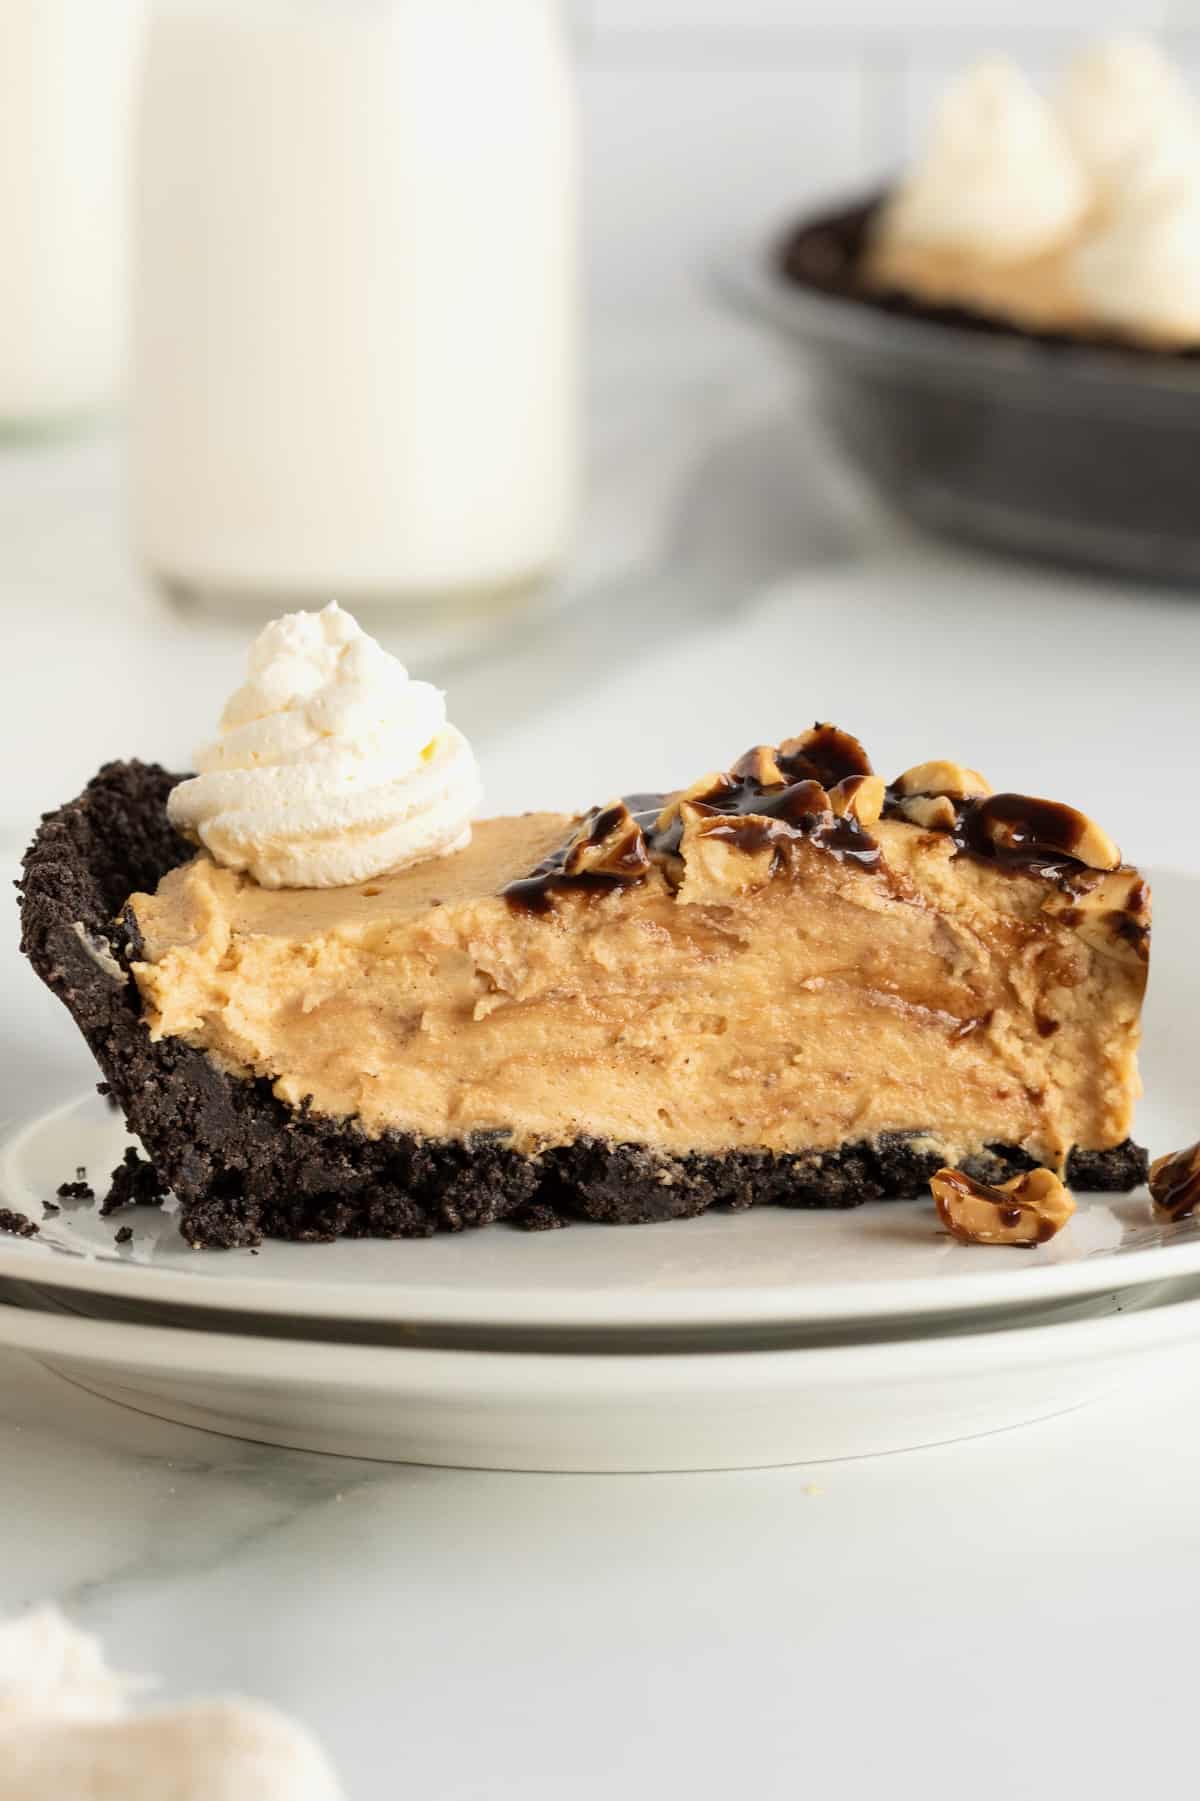 No Bake Chocolate Peanut Butter Pie from The Baker Mama